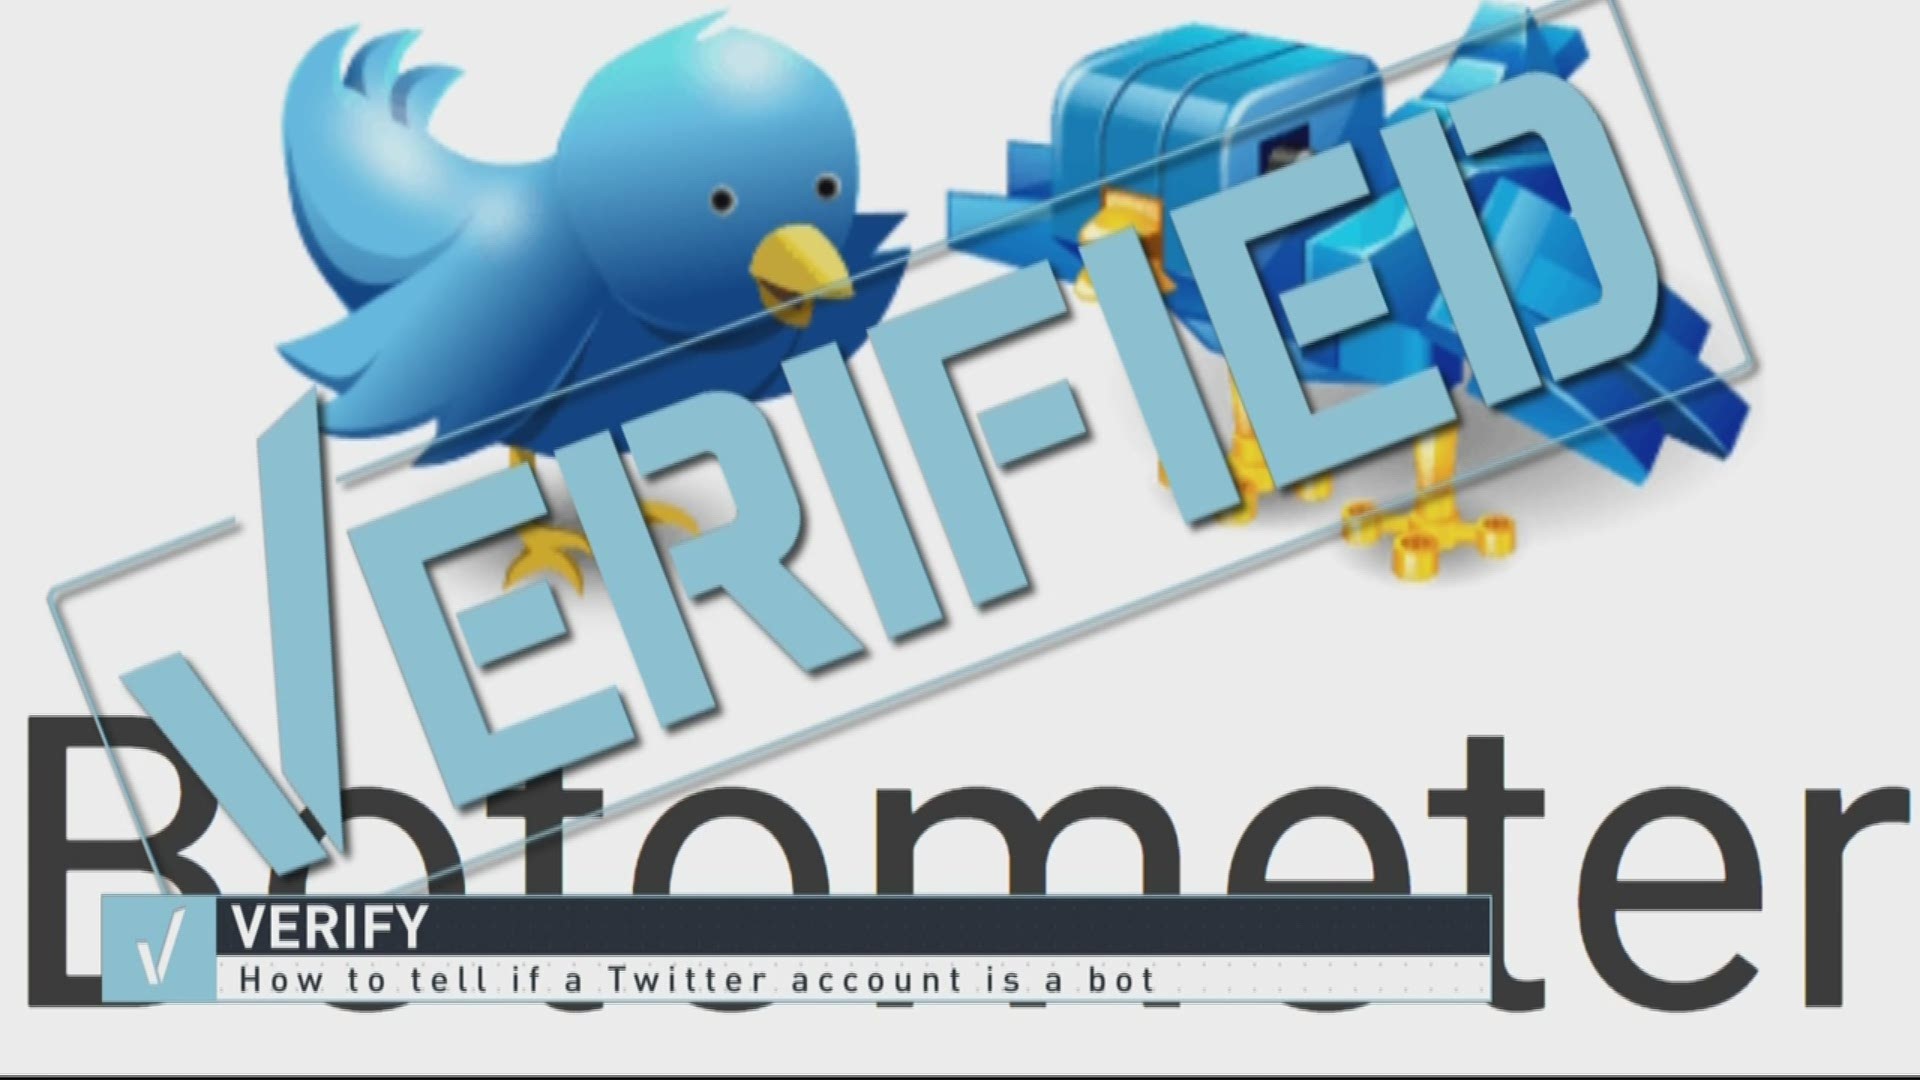 Botometer is an online tool that allows you to type in a Twitter handle, and an algorithm calculates the probability it's a bot.